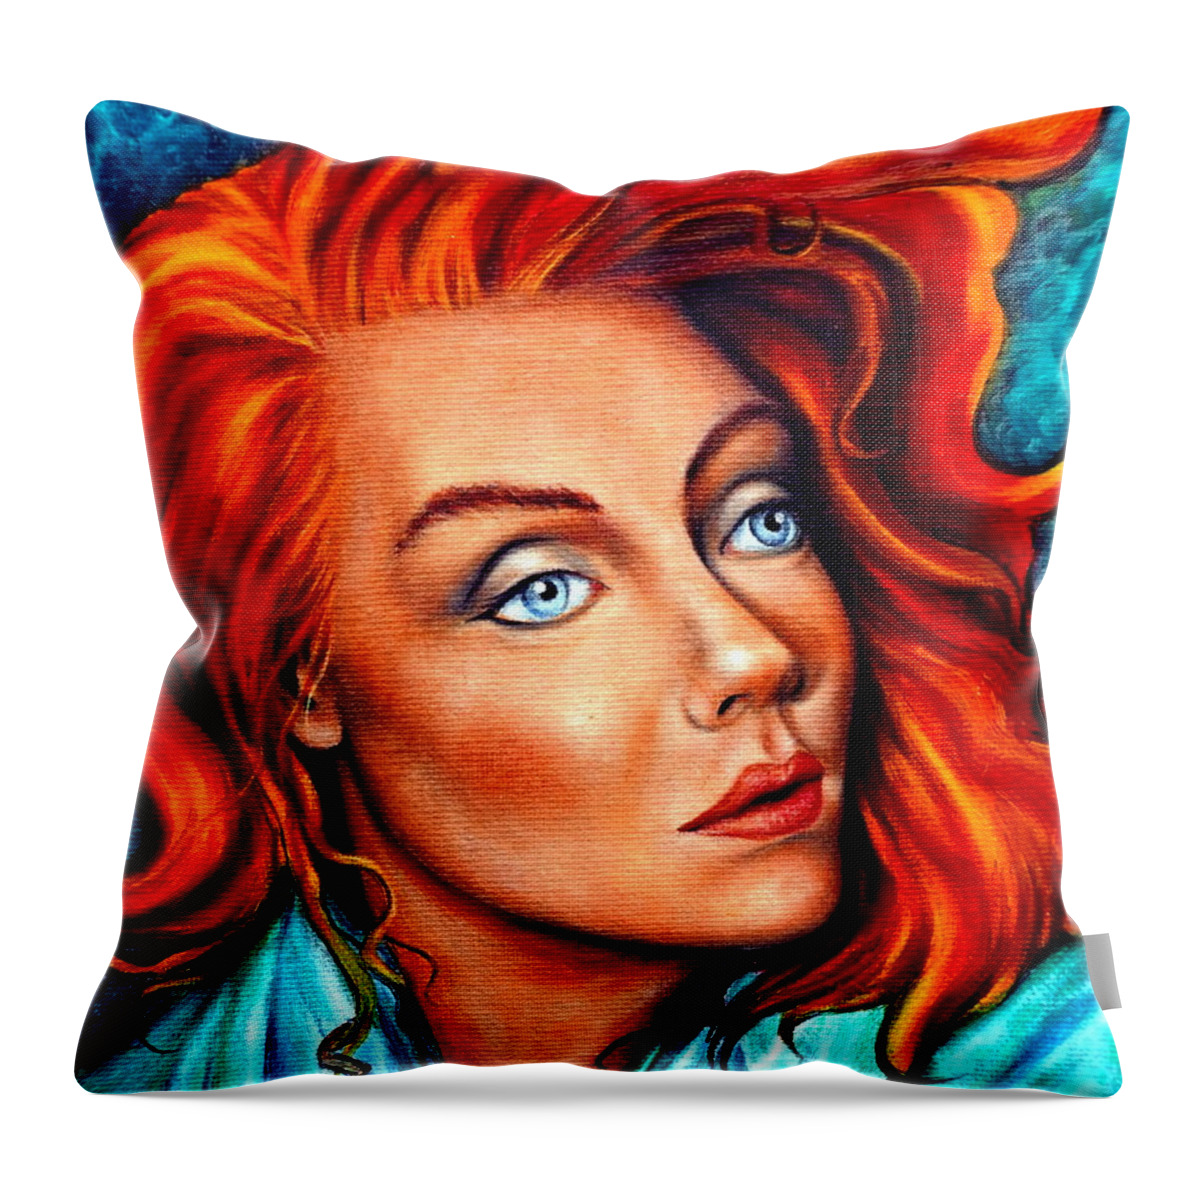 Adult Throw Pillow featuring the painting Surreal Crimson and Silk by Georgia Doyle